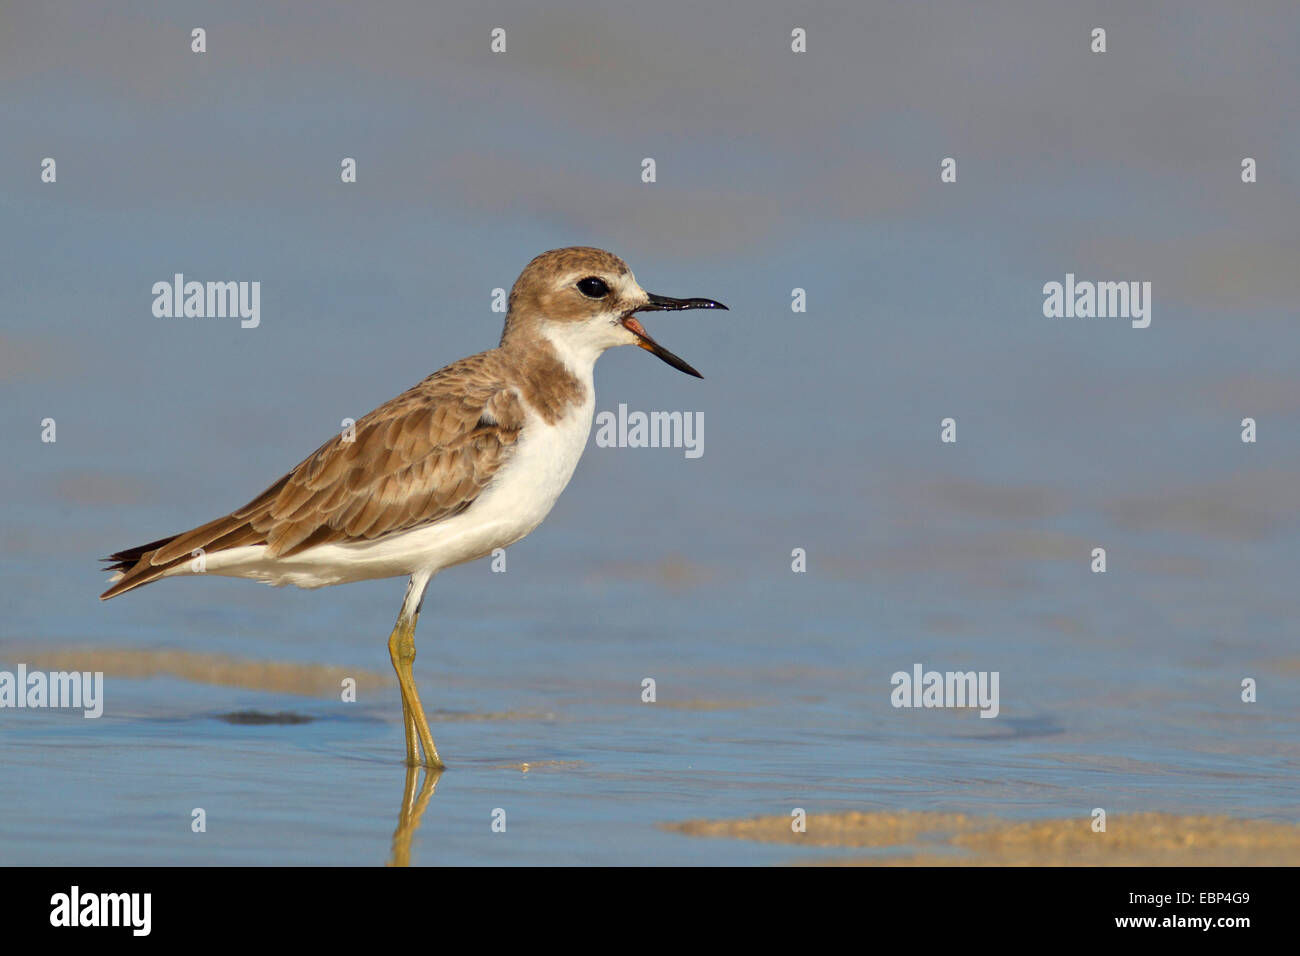 great sand plover (Charadrius leschenaultii), calling juvenile stands in shallow water, Seychelles, Praslin Stock Photo